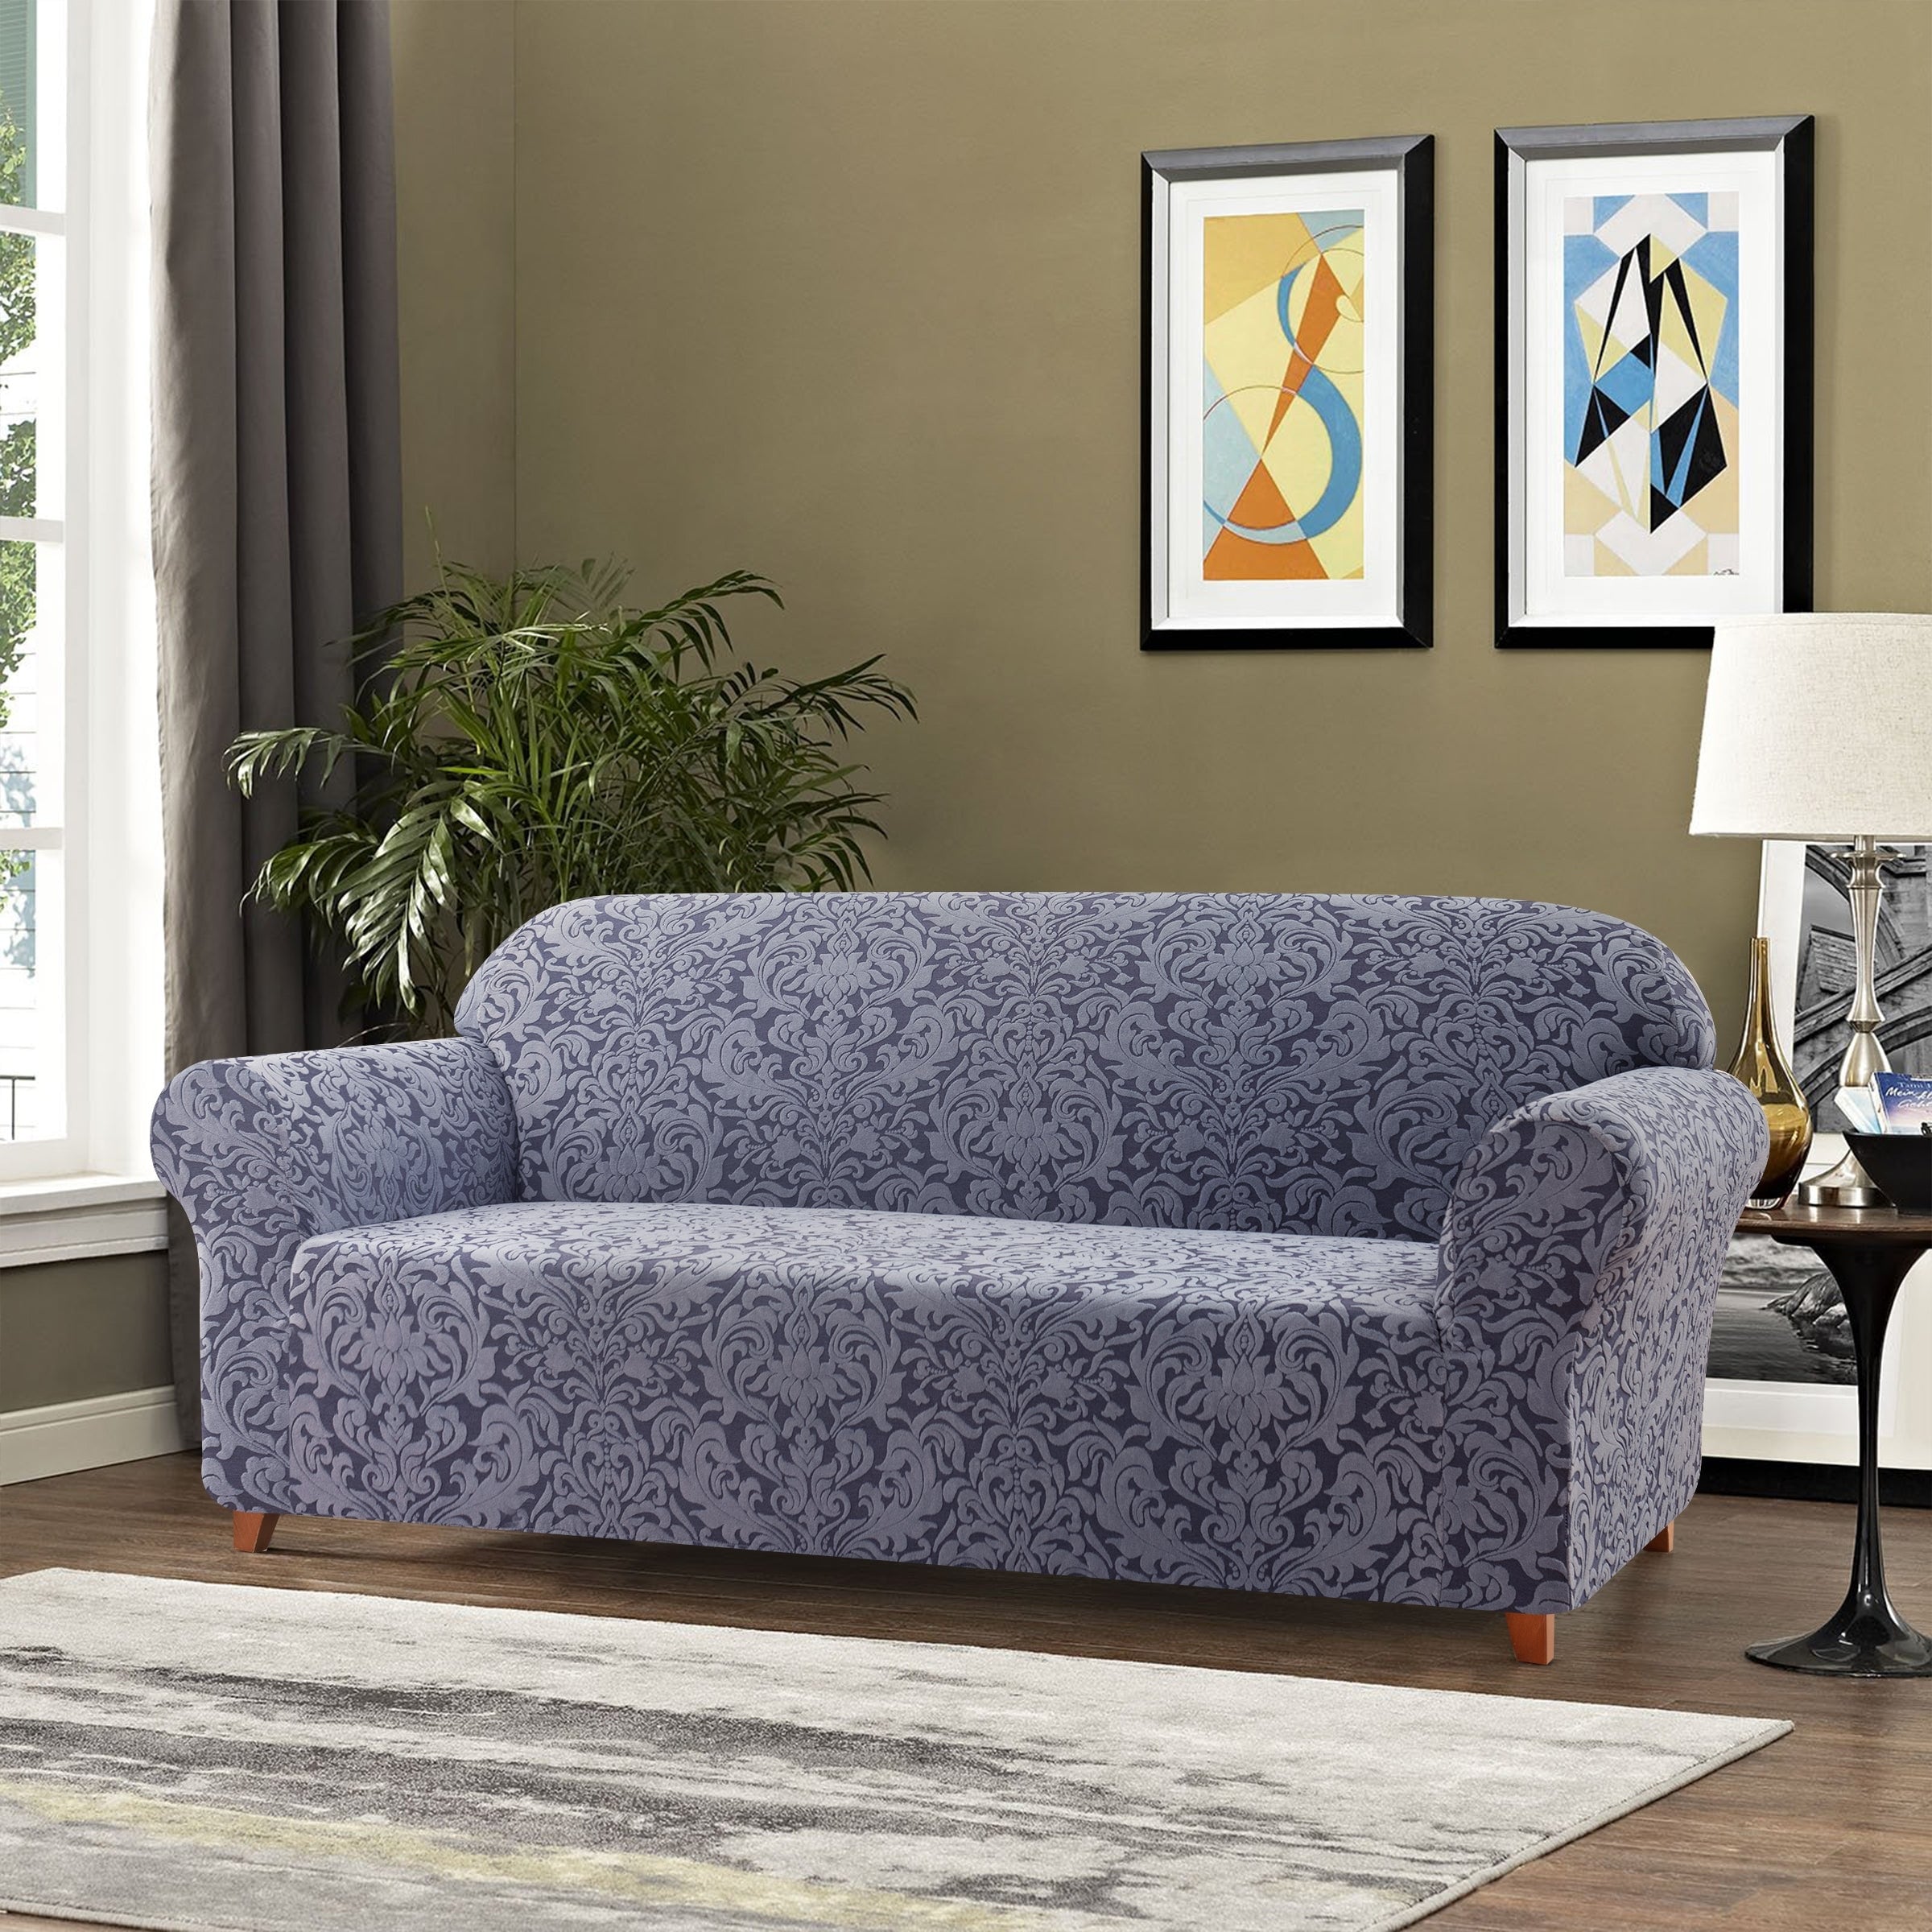 https://ak1.ostkcdn.com/images/products/is/images/direct/90abd7546c7e3843b65a6948cac0daafb6cf3762/Subrtex-1-Piece-XL-Sofa-Slipcover-Jacquard-Damask-Spandex-Furniture-Protector.jpg